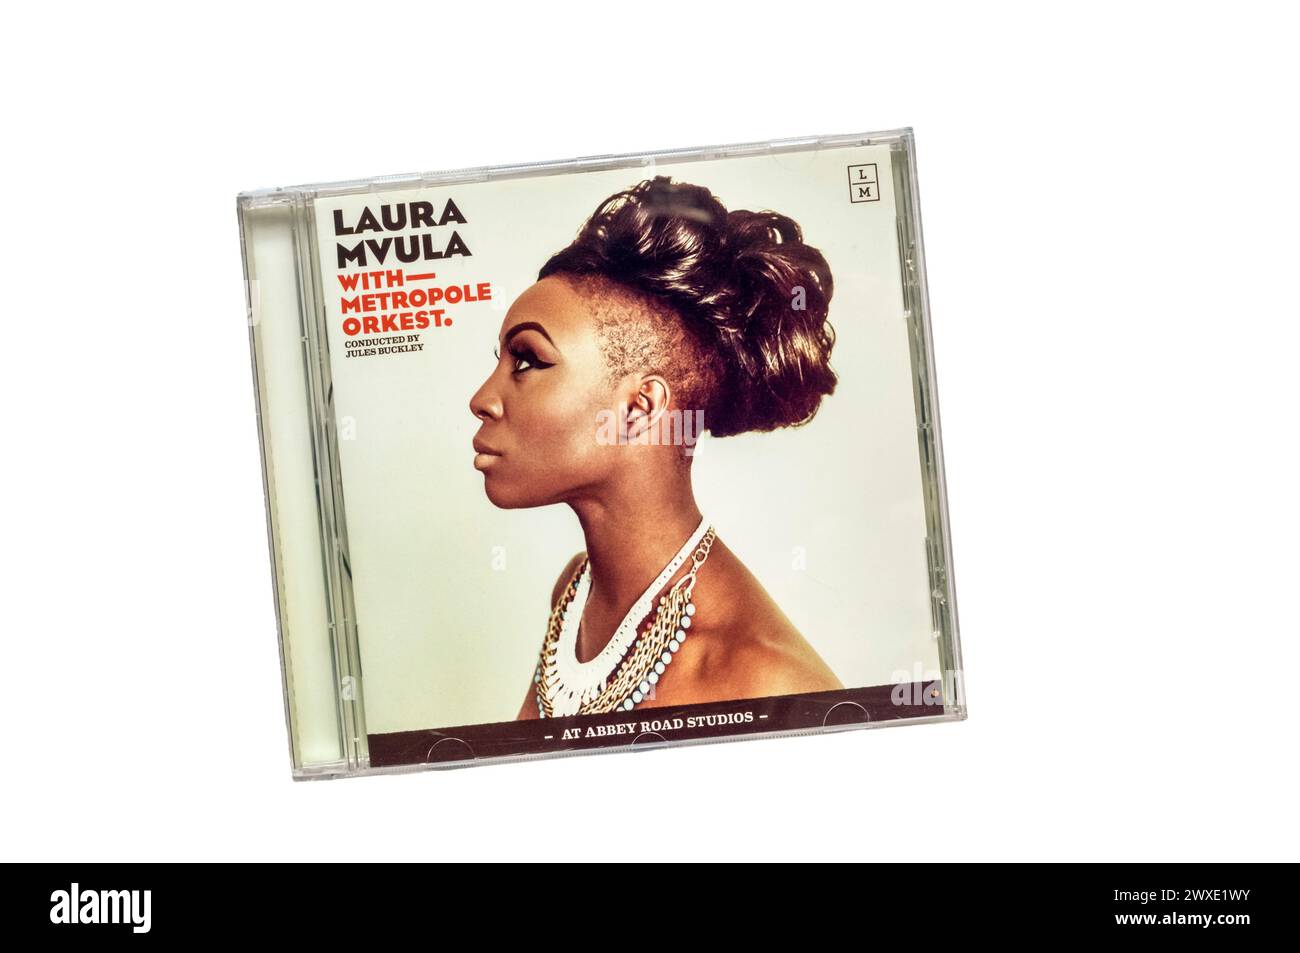 CD of Laura Mvula with Metropole Orkest conducted by Jules Buckley at Abbey Road Studios. A live album released in 2014. Stock Photo